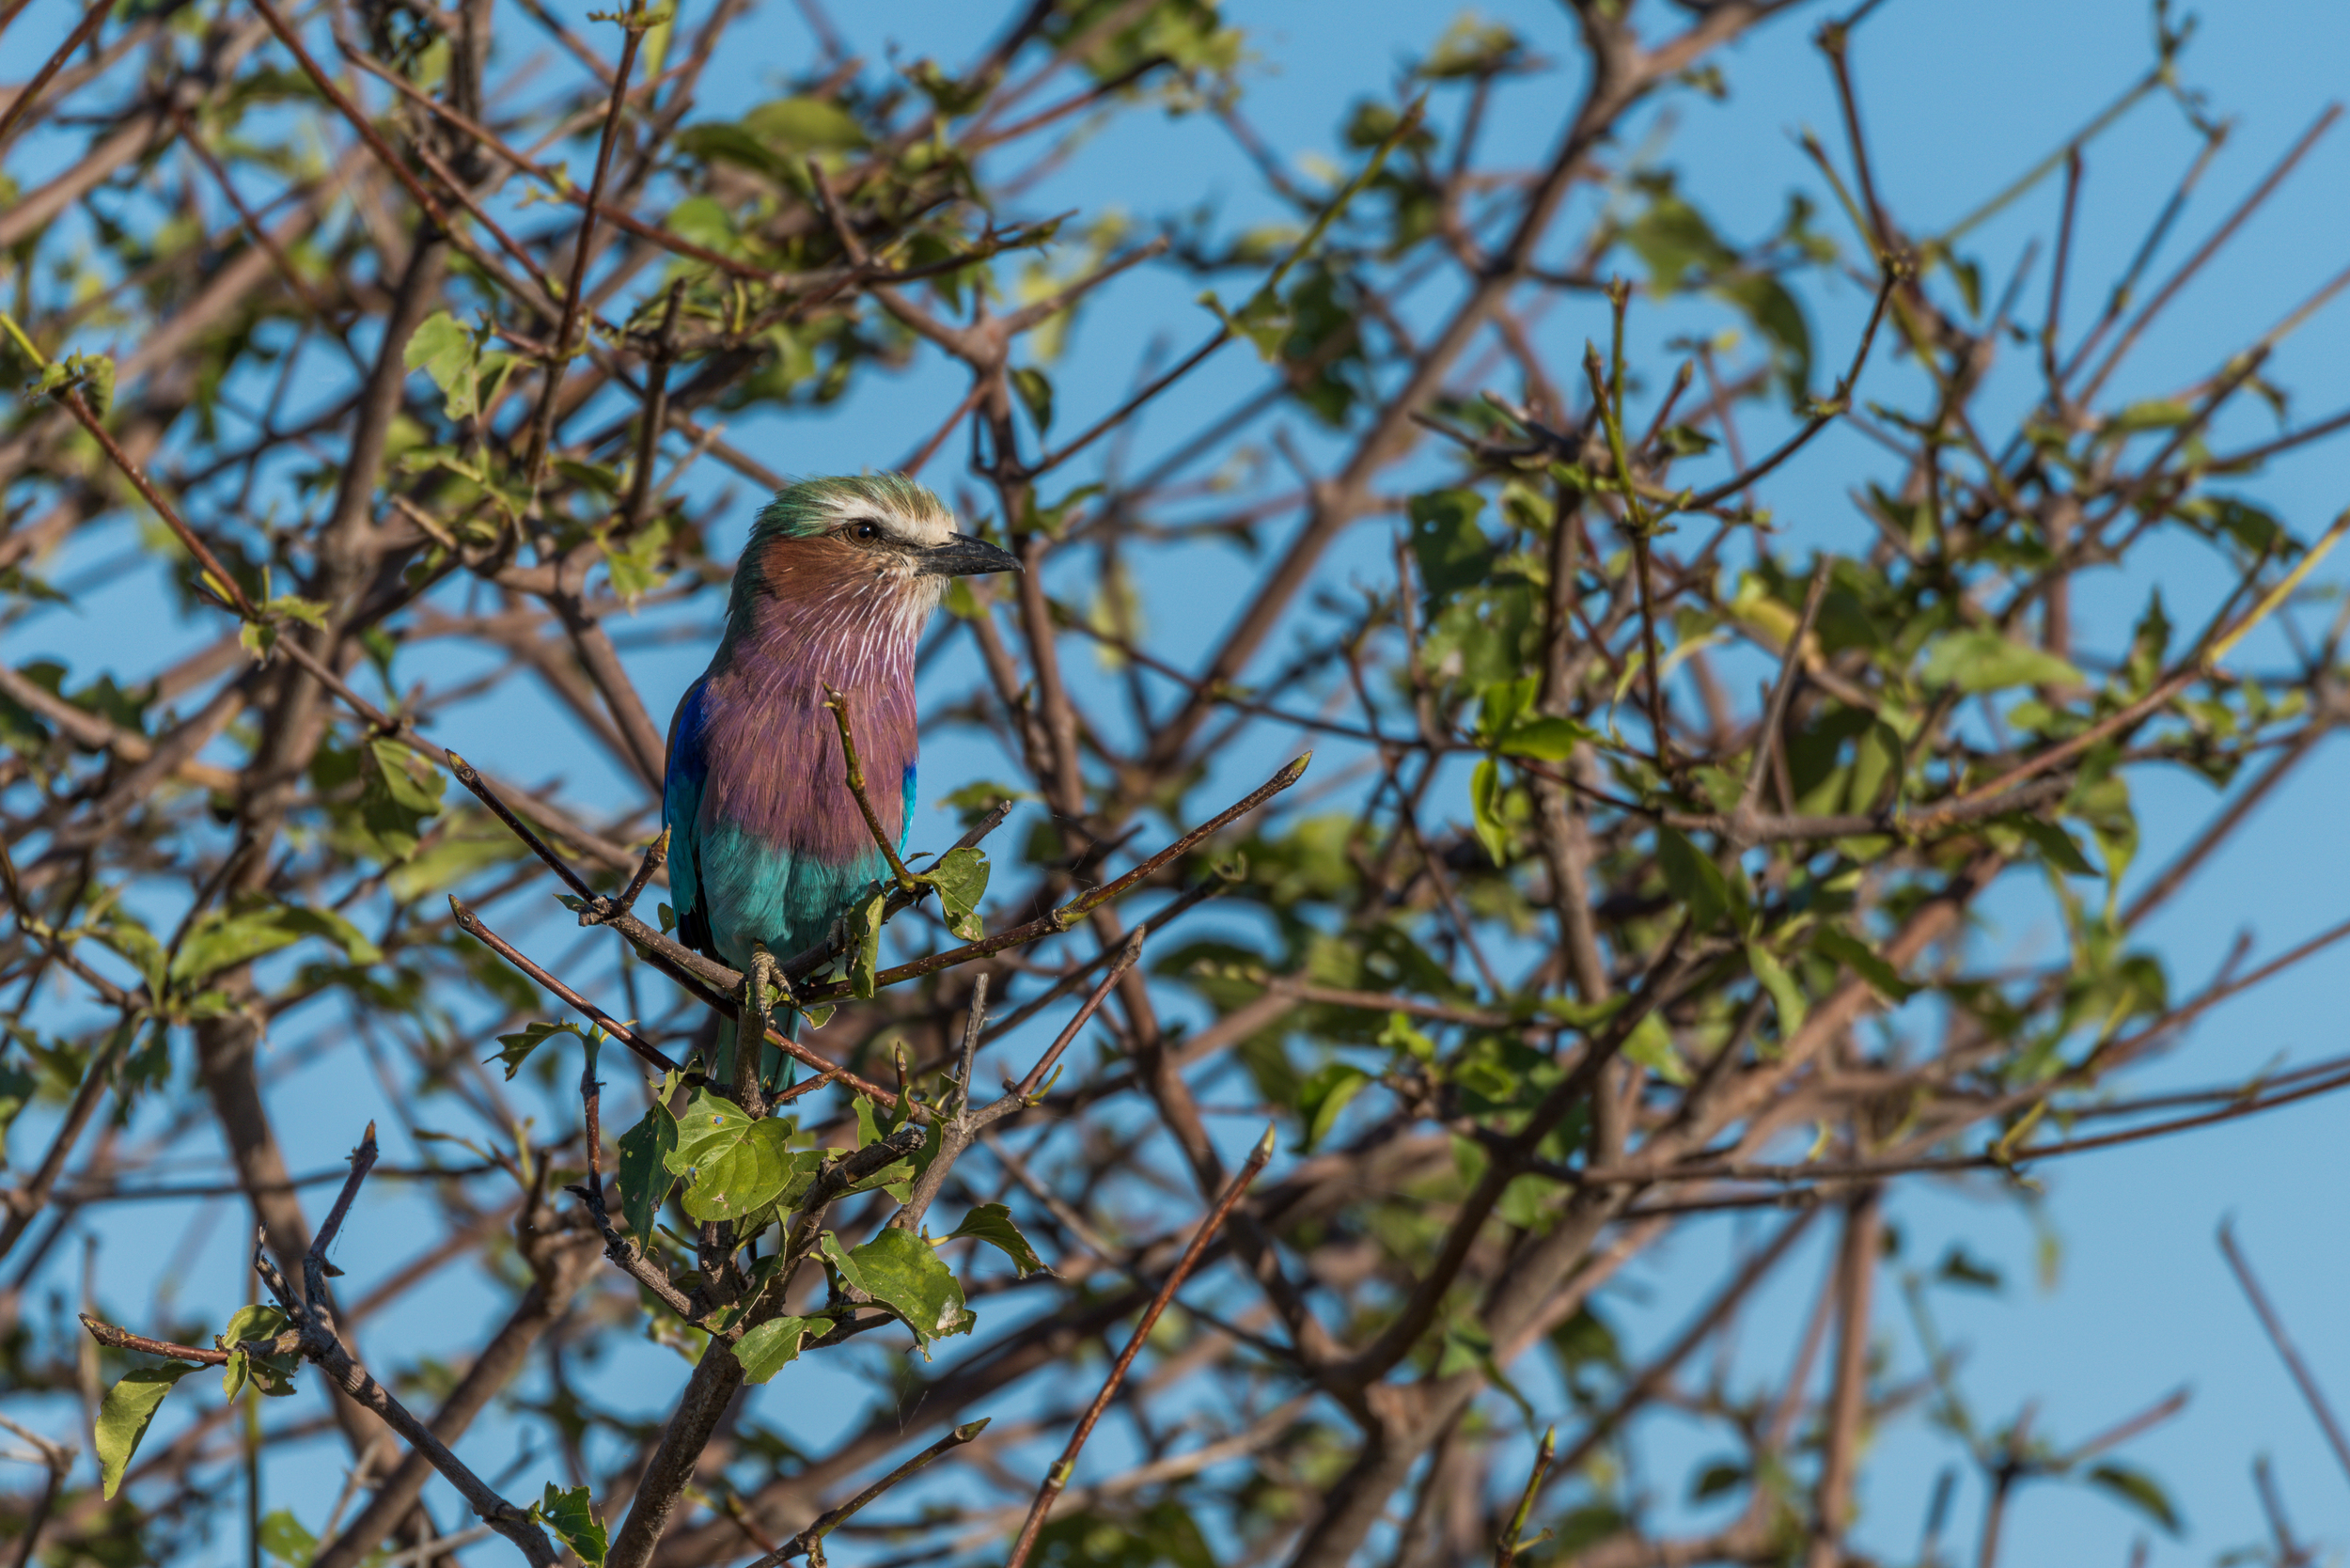 Lilac-breasted roller perched in leafy bush